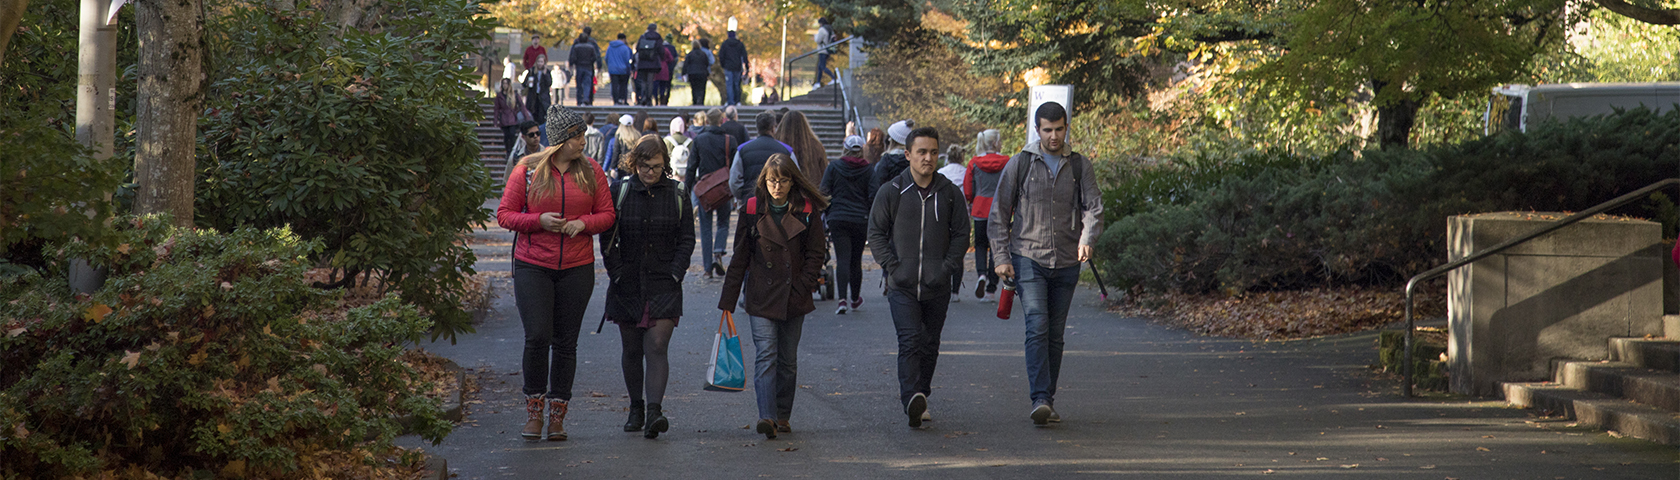 Students walking on the UW campus.